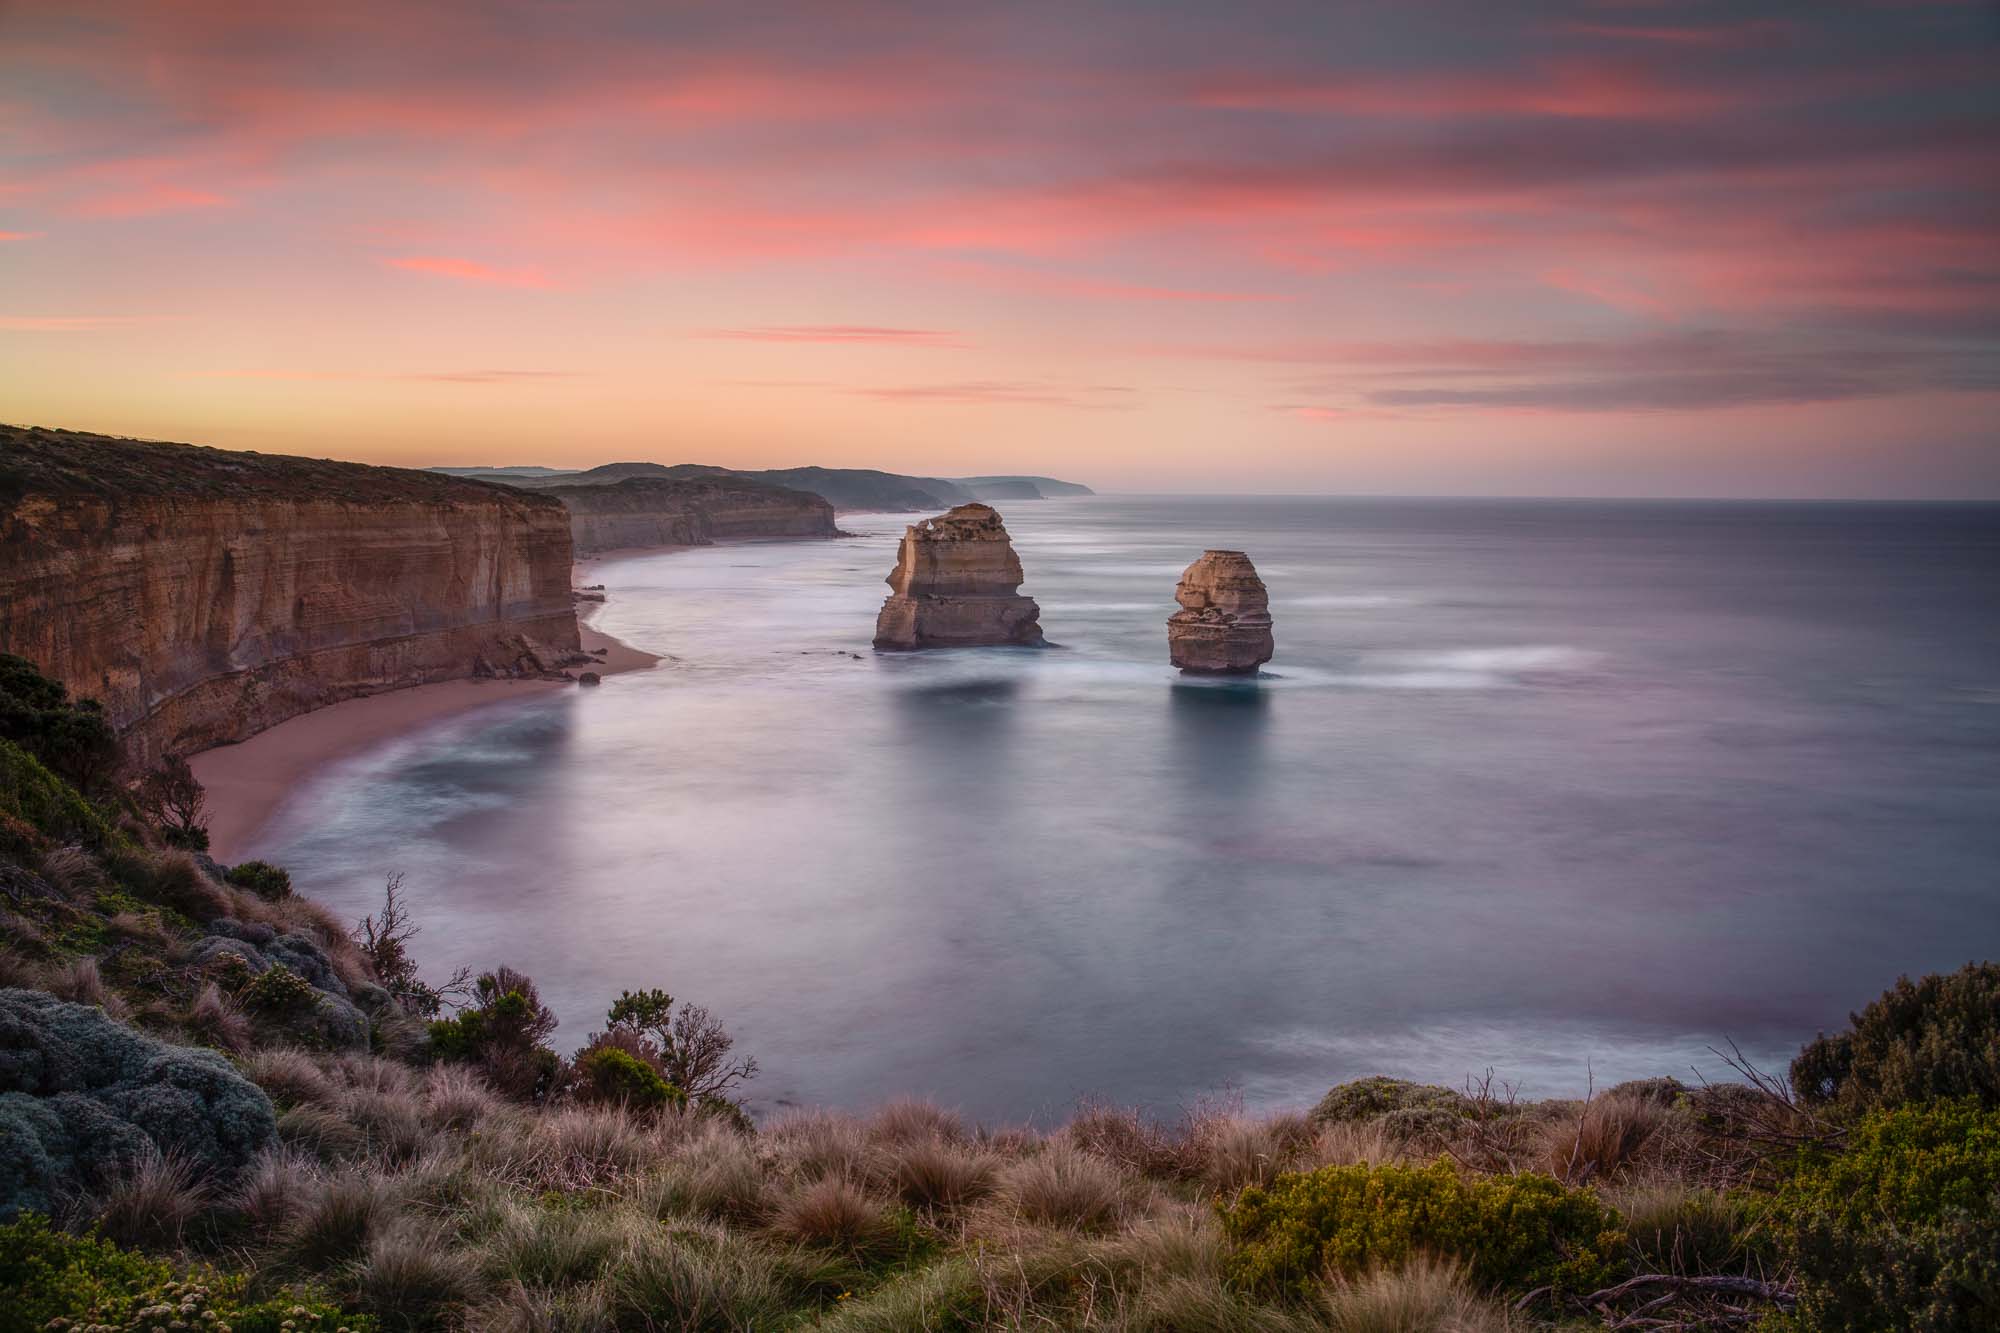 Sunset at The Twelve Apostles, with smooth seas and pastel skies highlighting the limestone formations off Australia's coast.